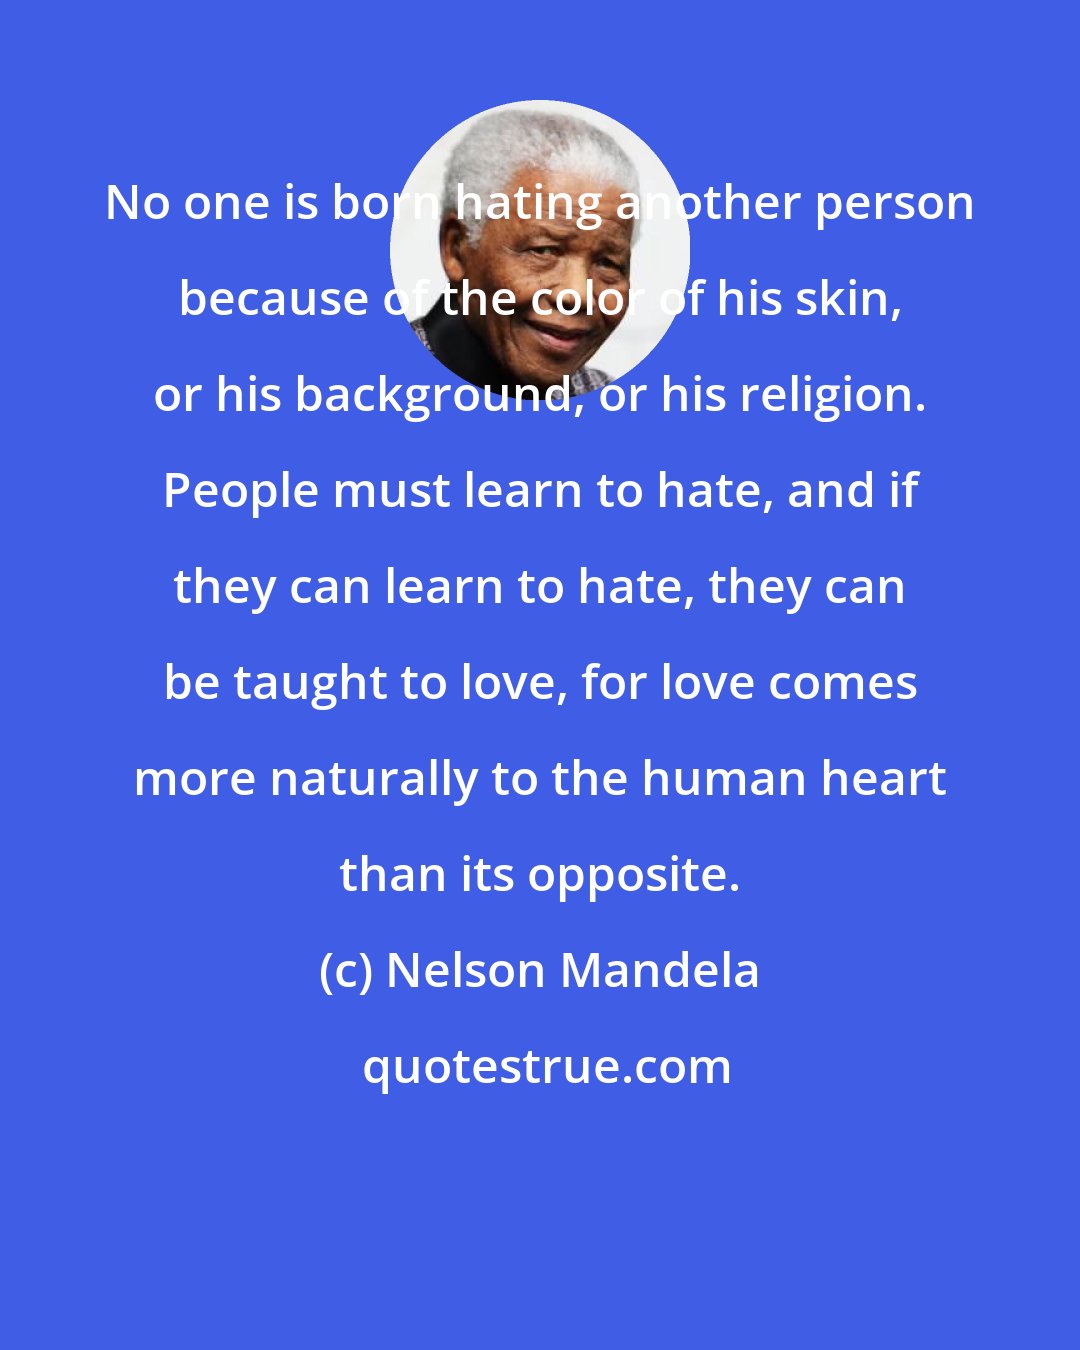 Nelson Mandela: No one is born hating another person because of the color of his skin, or his background, or his religion. People must learn to hate, and if they can learn to hate, they can be taught to love, for love comes more naturally to the human heart than its opposite.